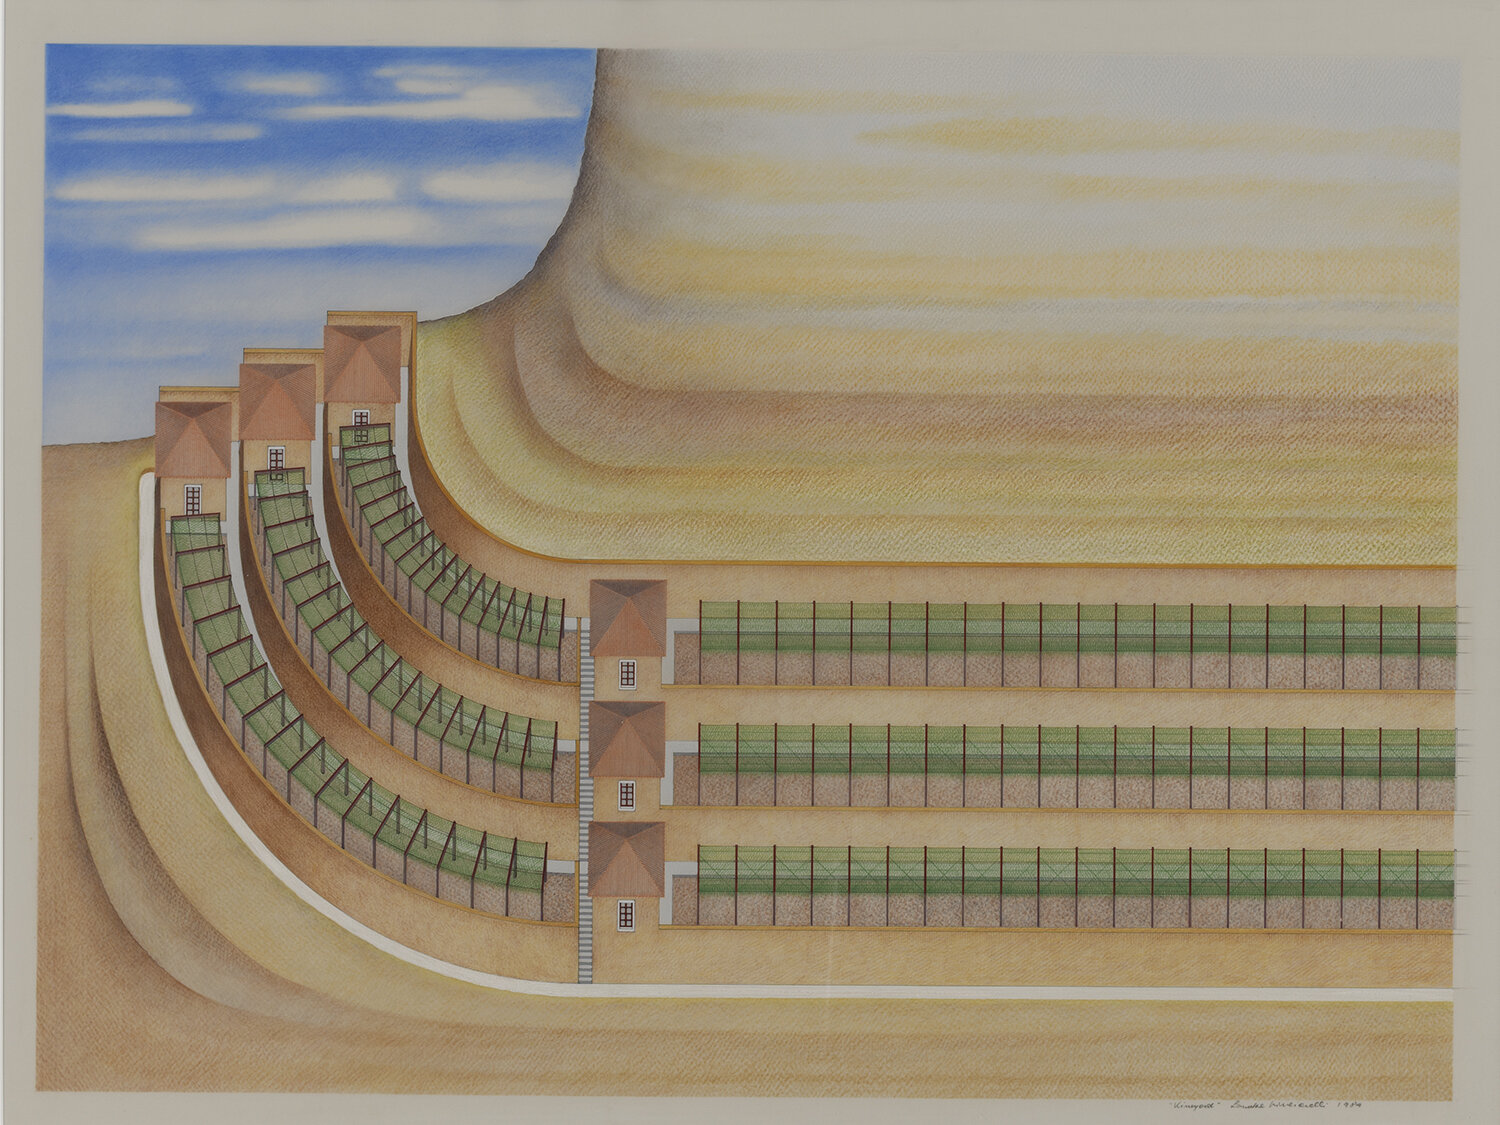   Vineyard , 1984 colored pencil on paper 25 × 33 inches (64 × 84 cm) 